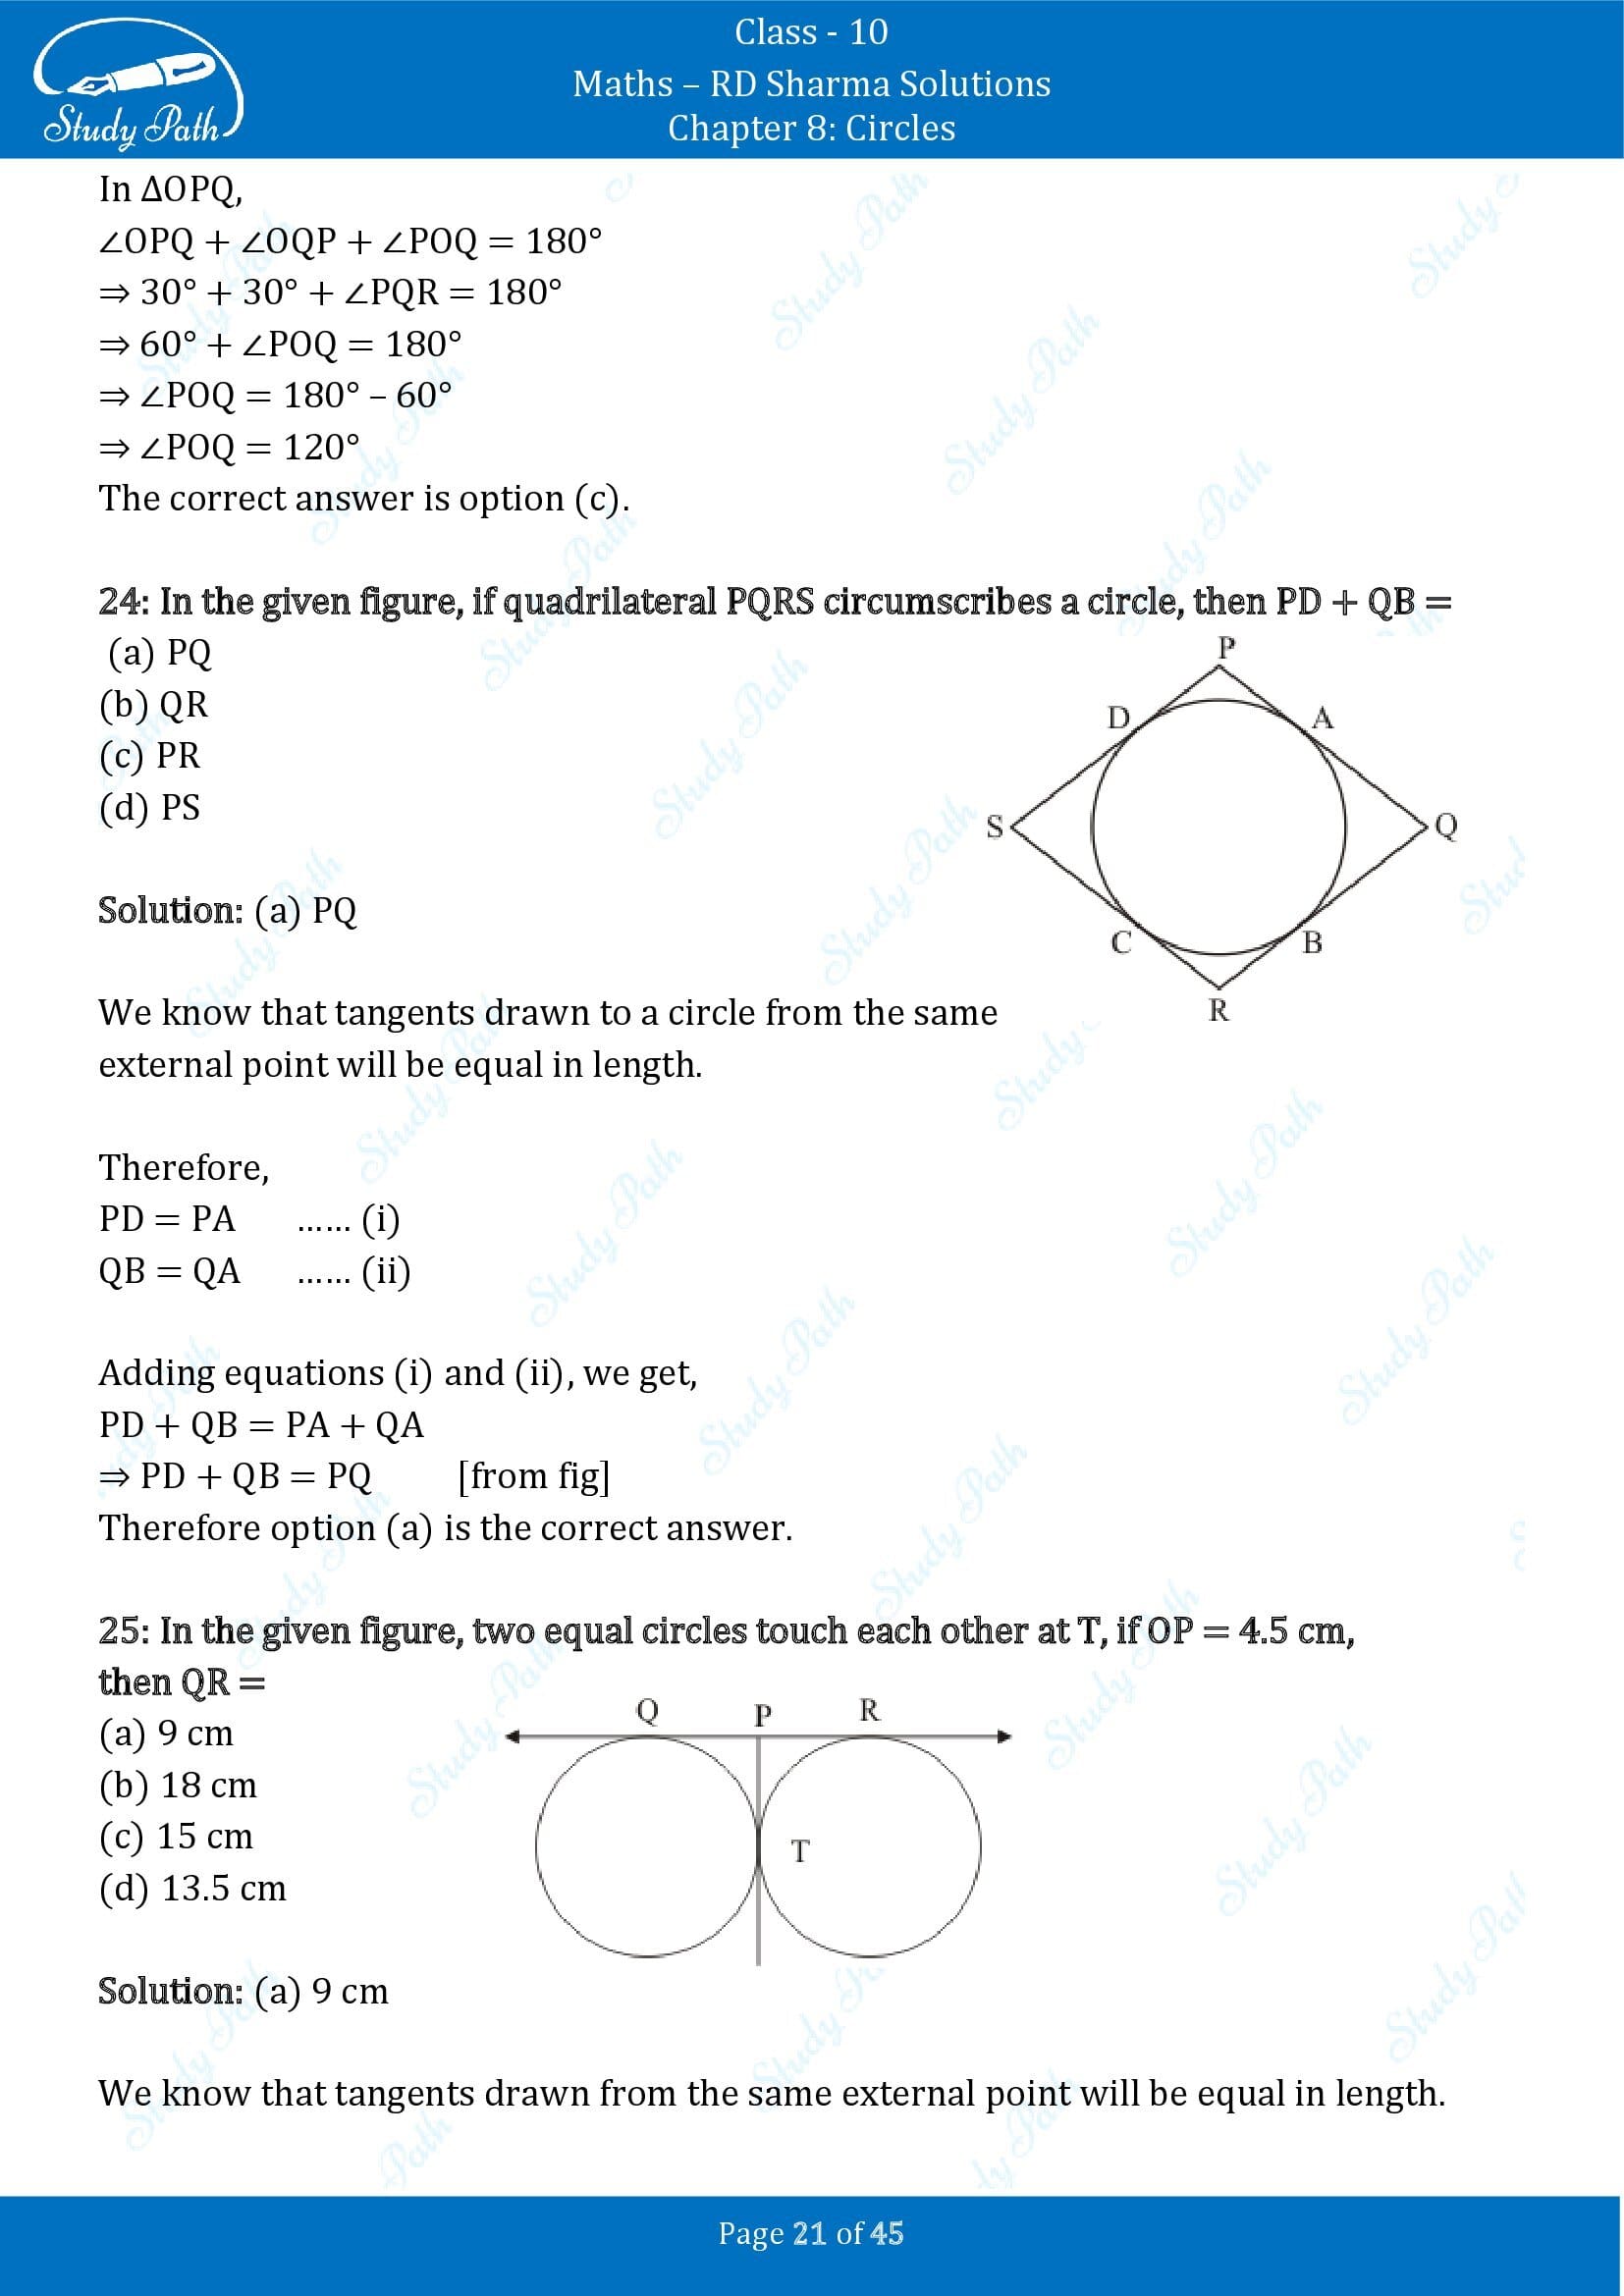 RD Sharma Solutions Class 10 Chapter 8 Circles Multiple Choice Questions MCQs 00021